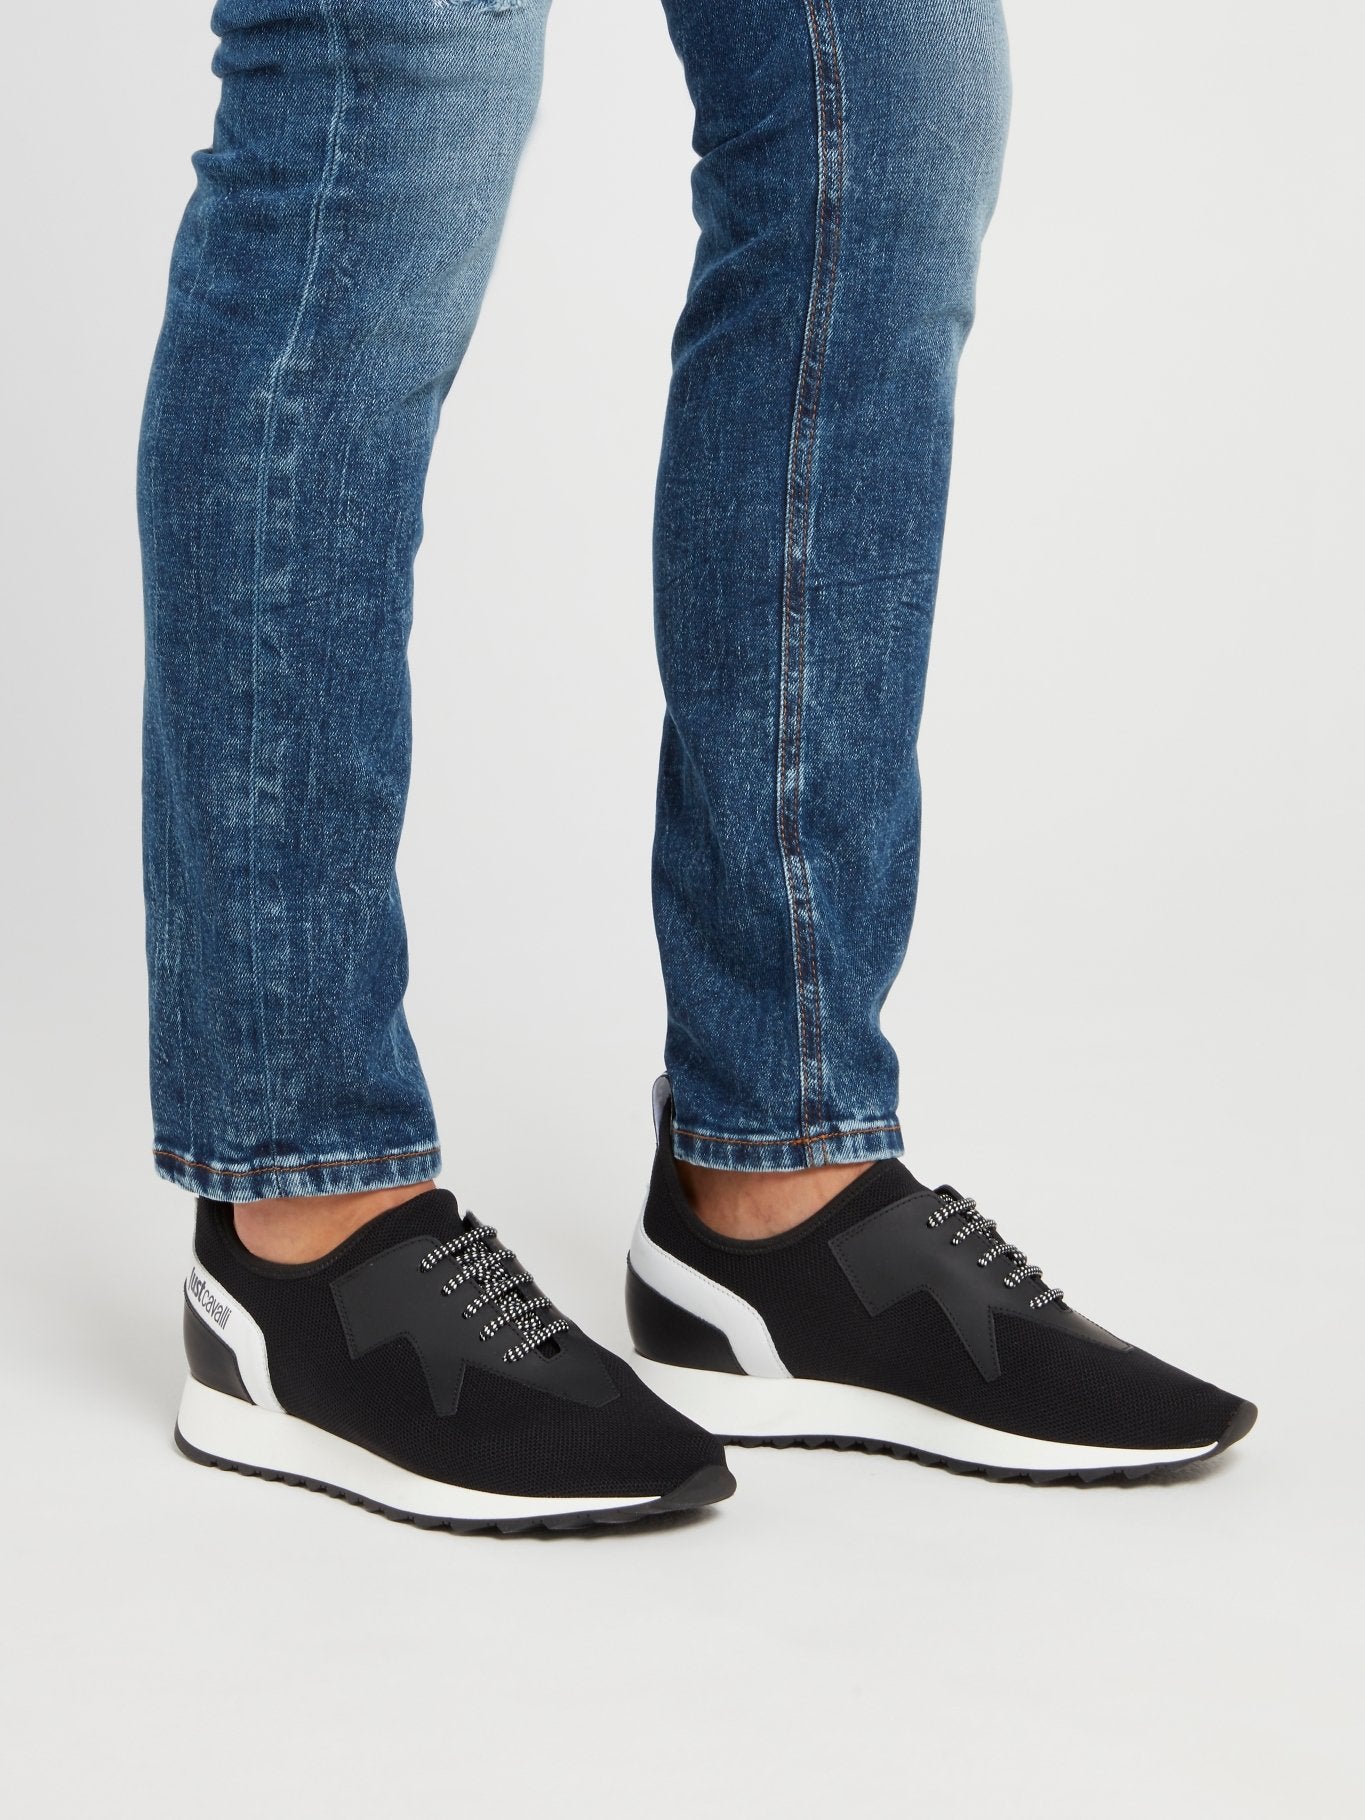 Black Mesh Lace Up Sneakers